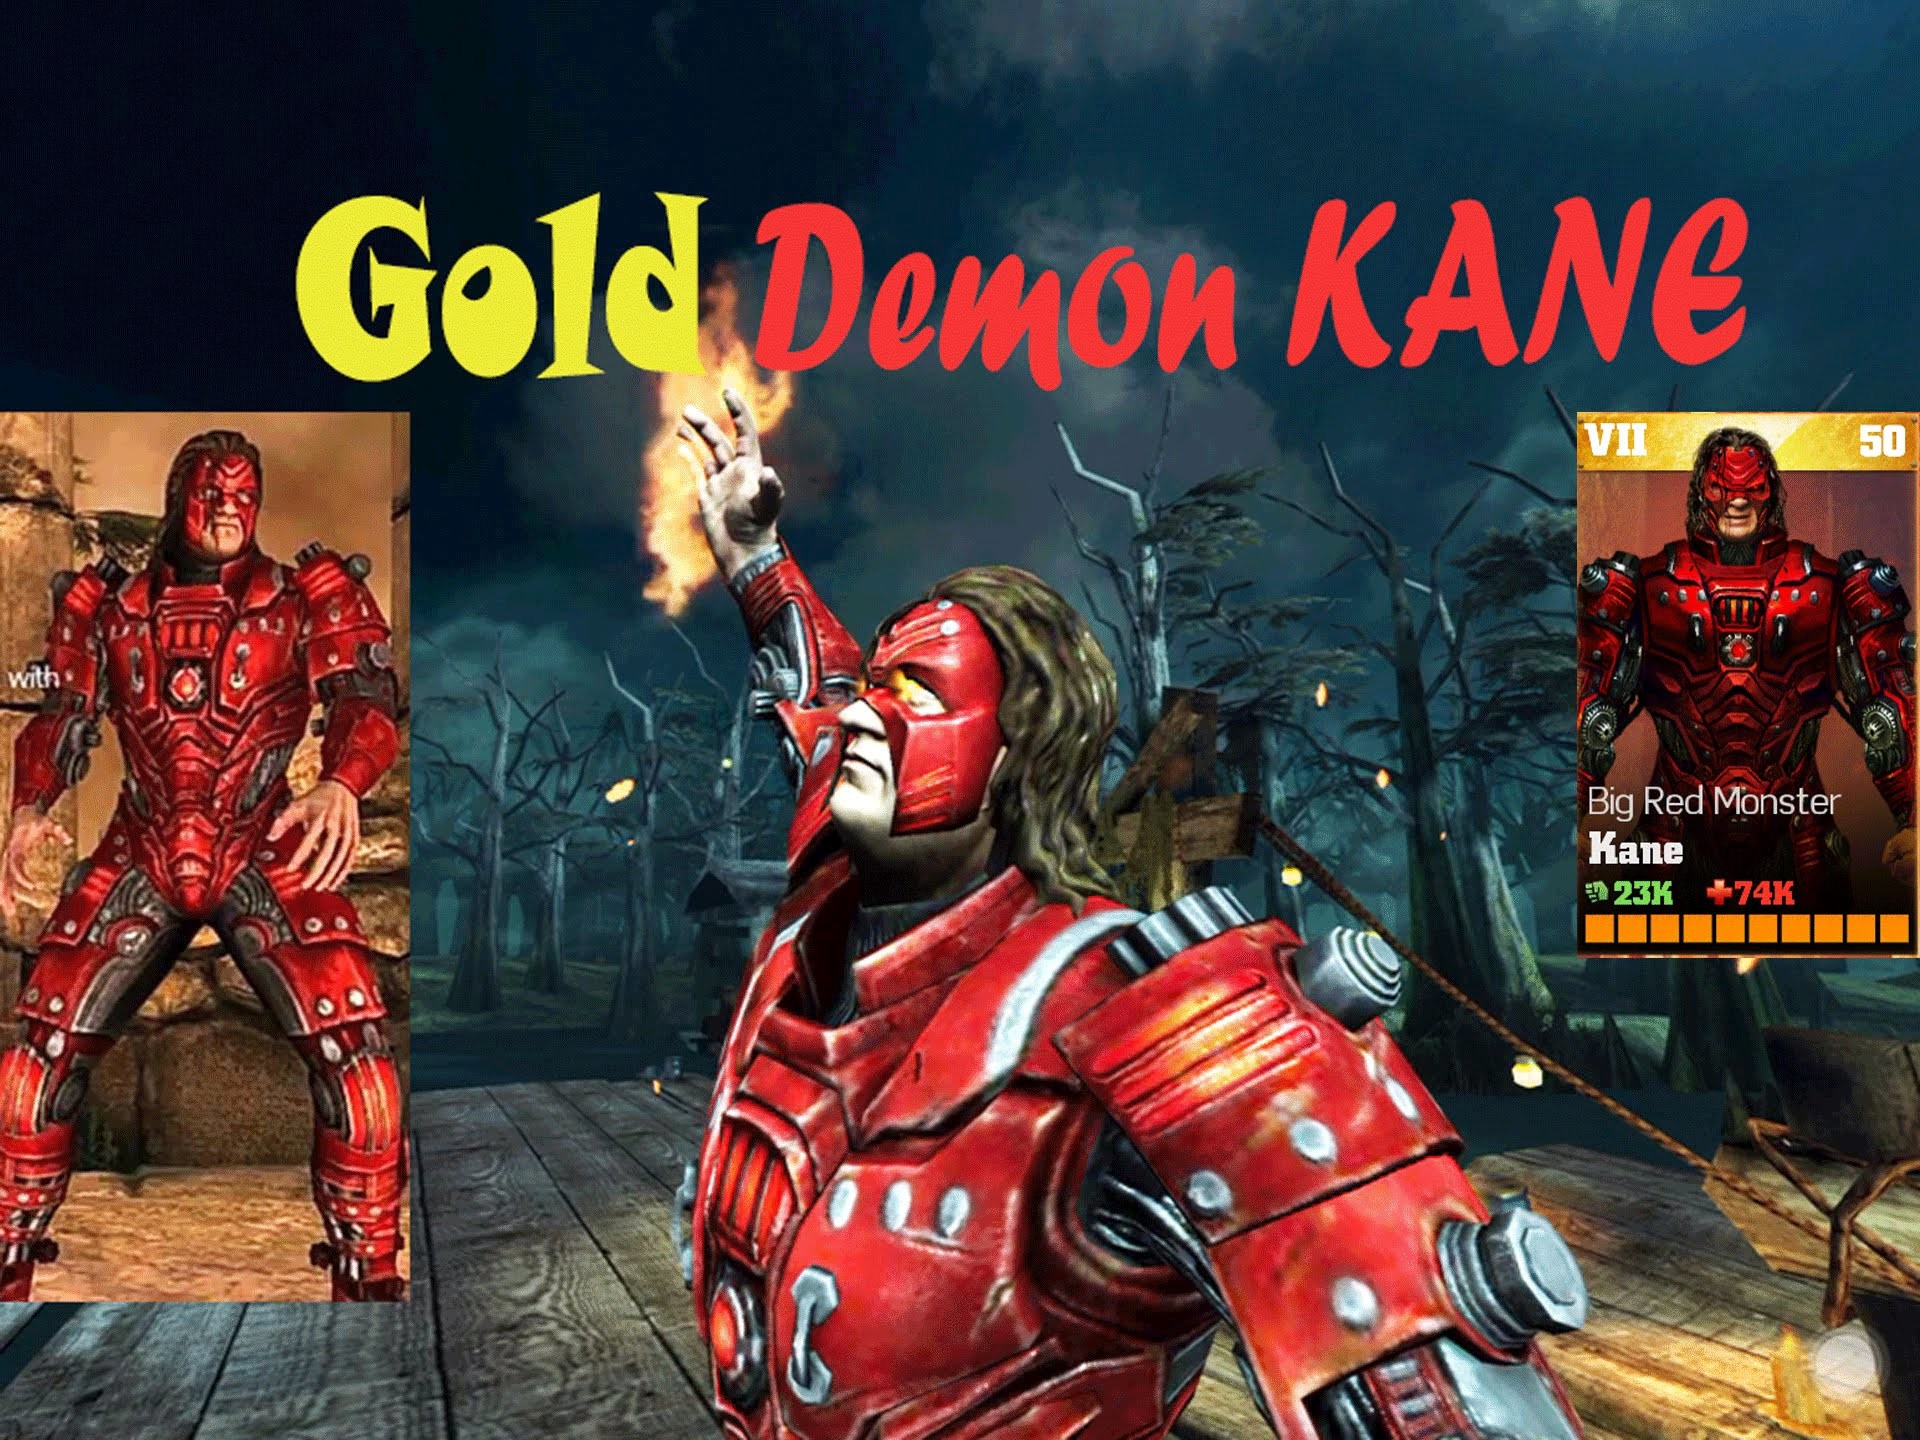 1920x1440 Update 1.9 Big Red Monster KANE Review All special Attacks:WWE Immortals  Ios/Android - YouTube